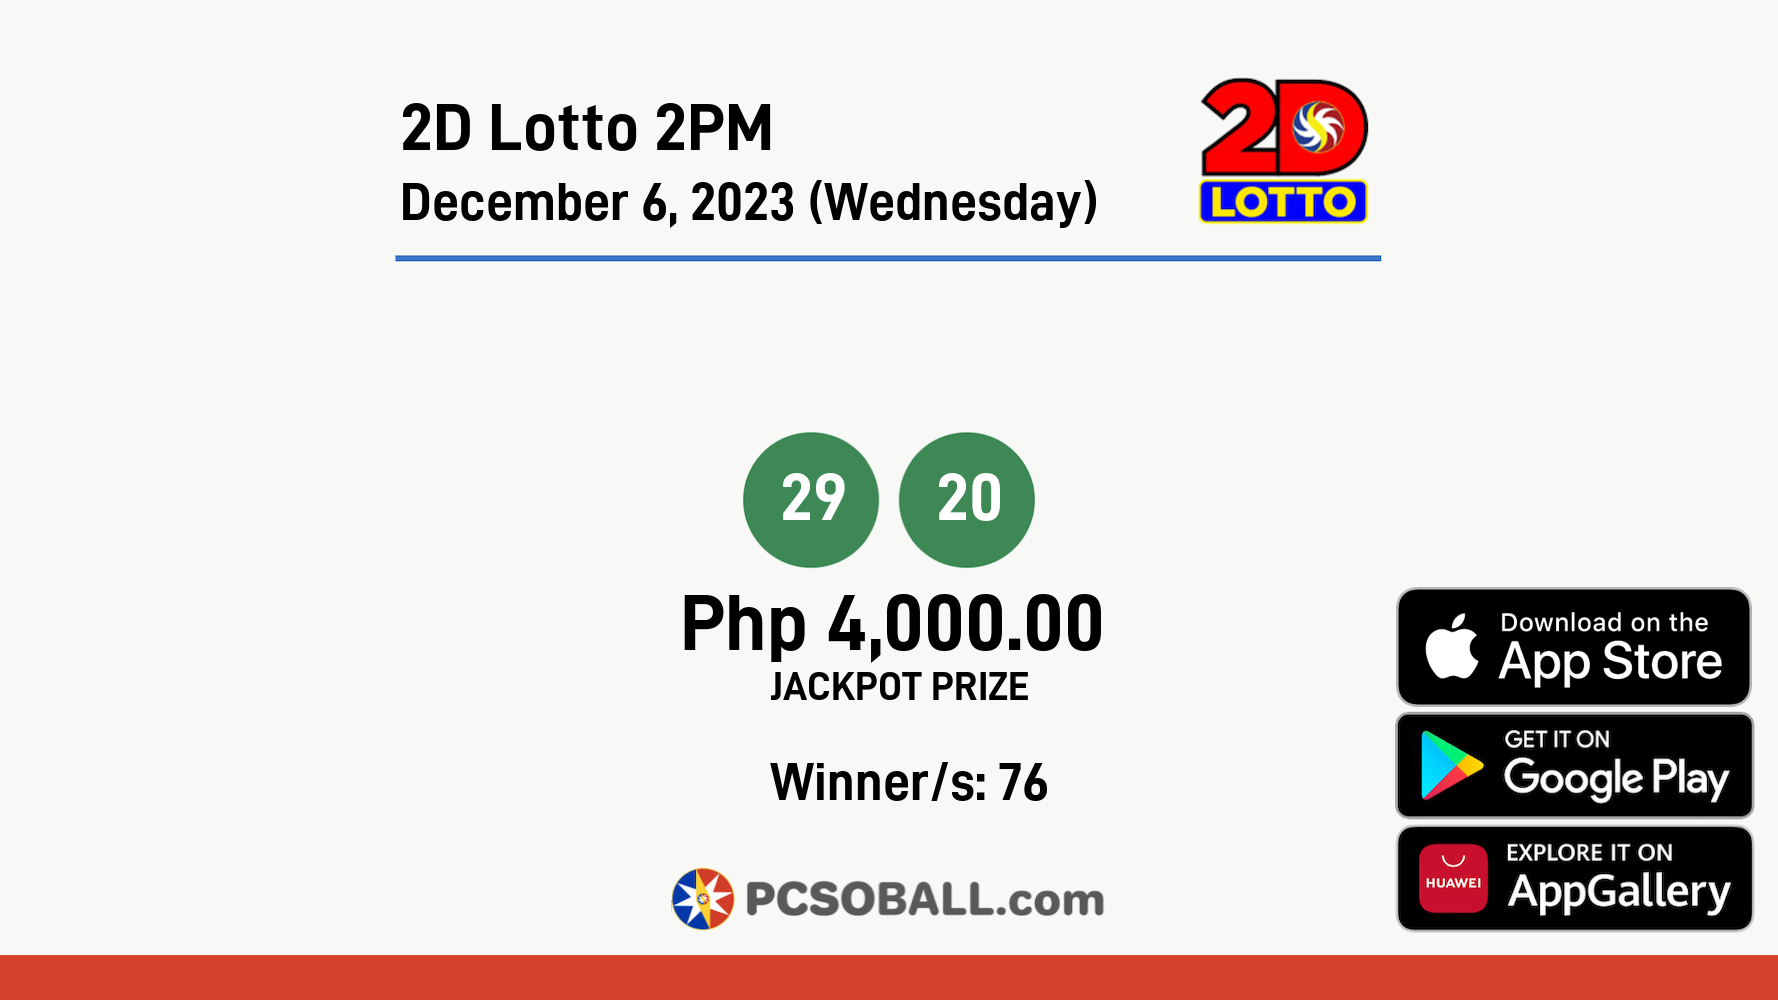 2D Lotto 2PM December 6, 2023 (Wednesday) Result